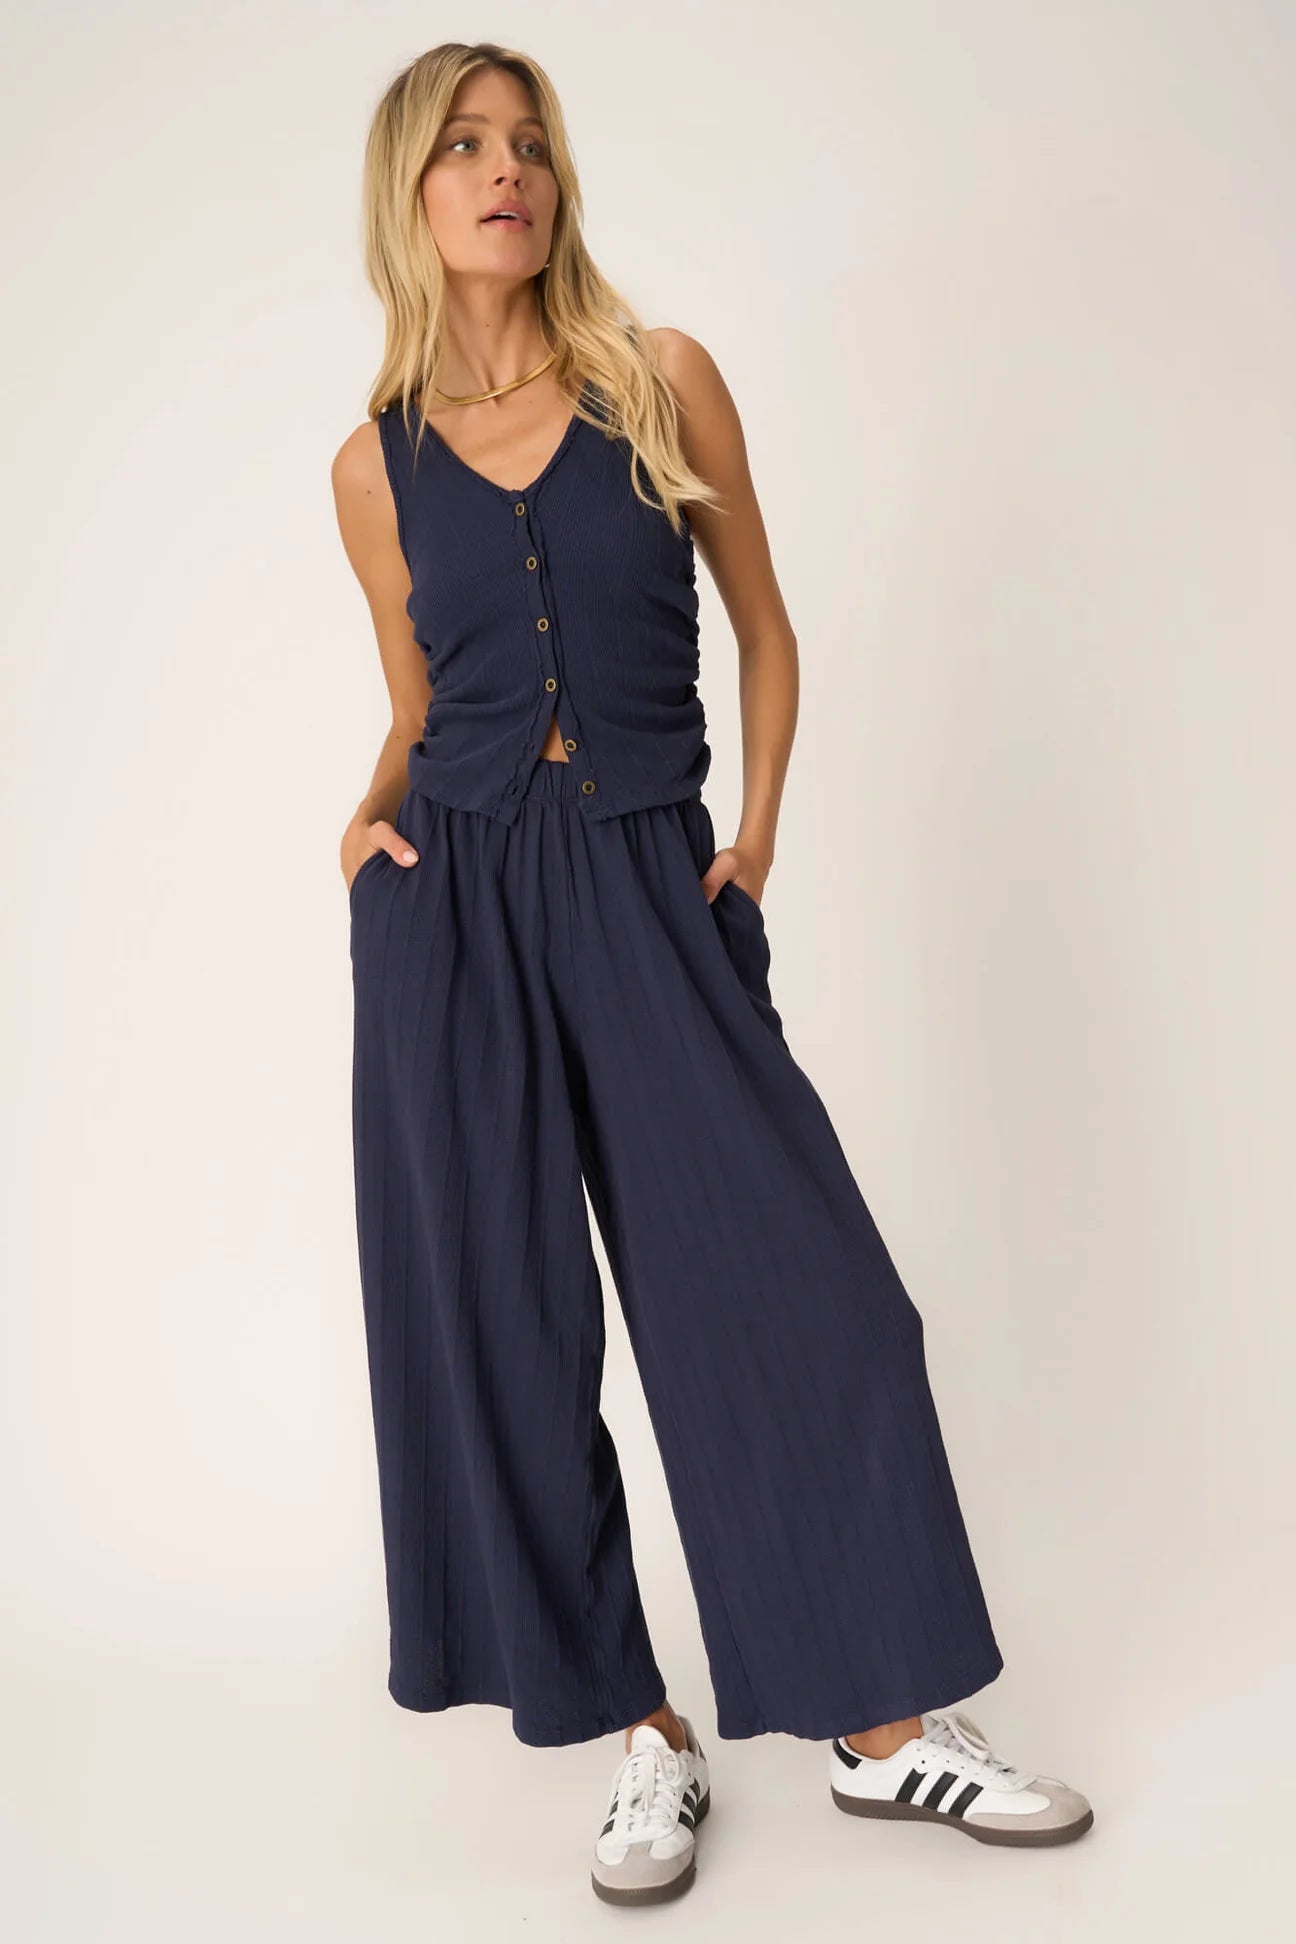 PROJECT SOCIAL T- COME TOGETHER TEXTURED WIDE LEG PANTS